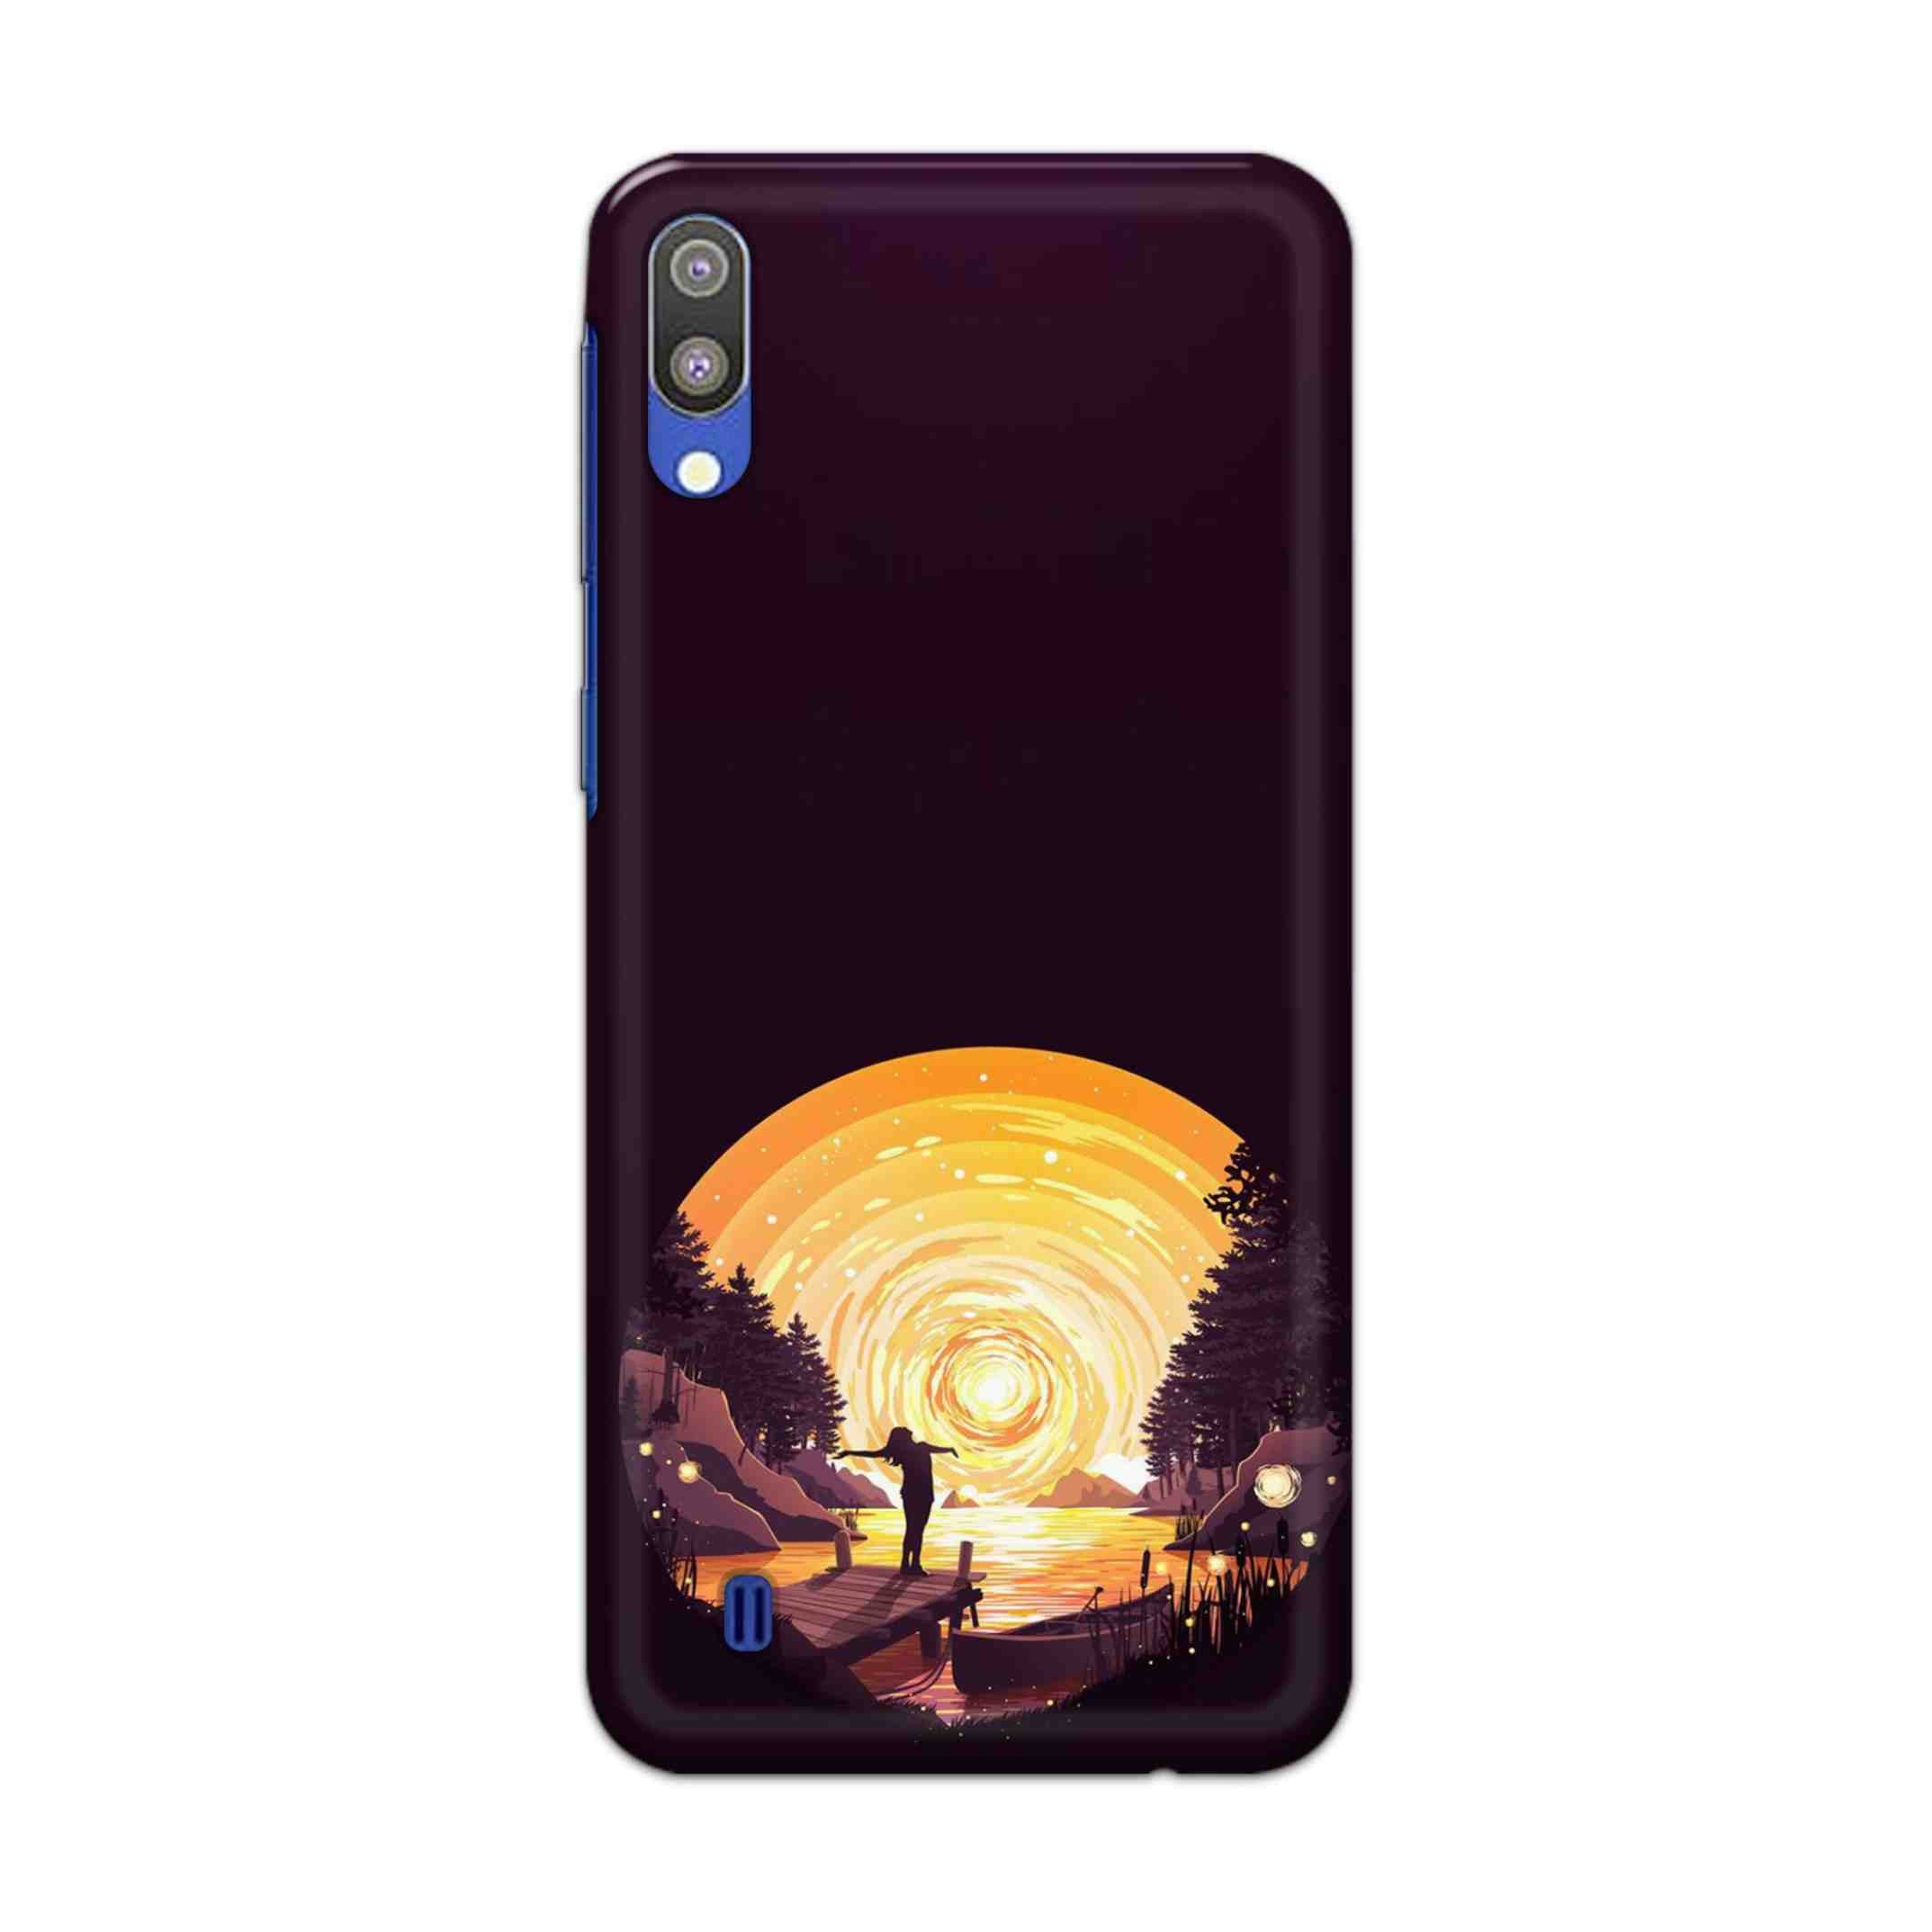 Buy Night Sunrise Hard Back Mobile Phone Case Cover For Samsung Galaxy M10 Online